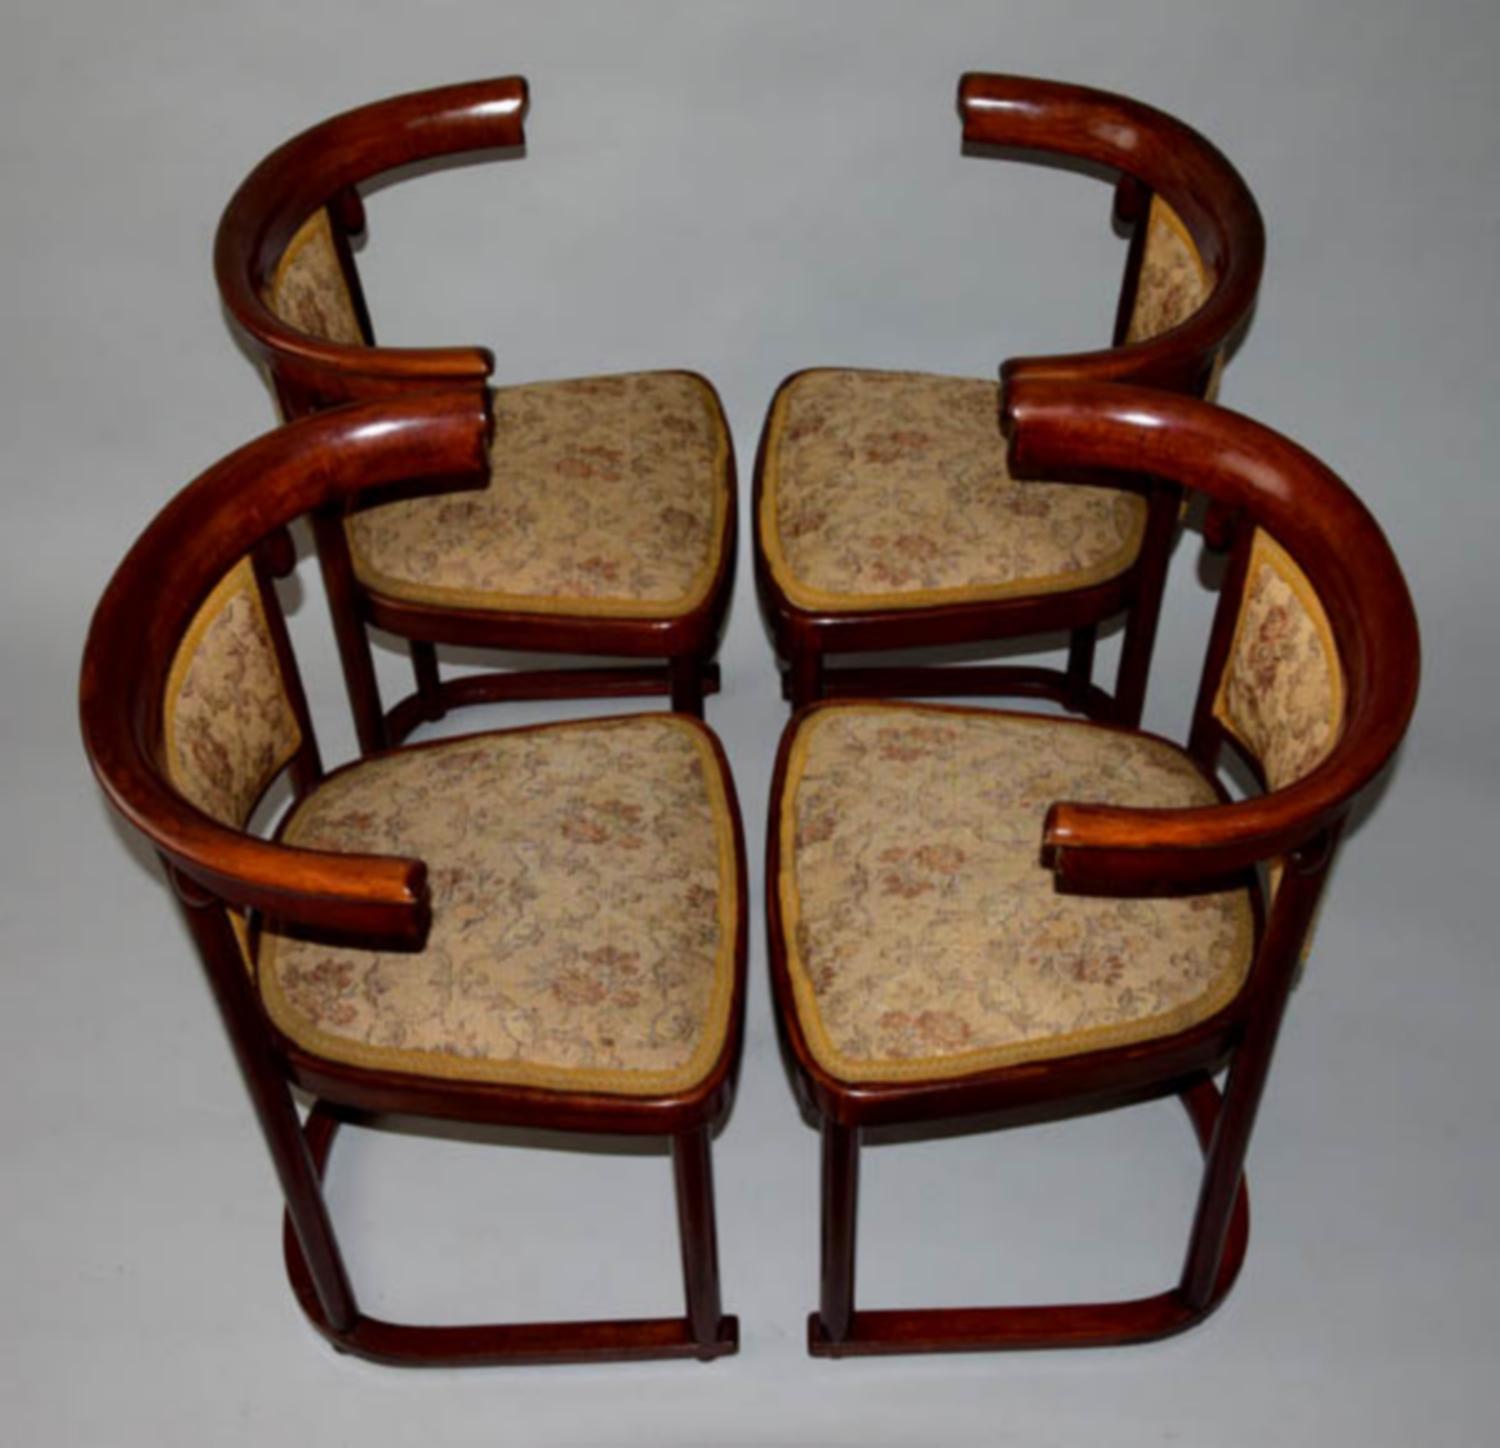 Art Nouveau Secession Dining Chairs By Josef Hoffmann for Thonet, 1910s